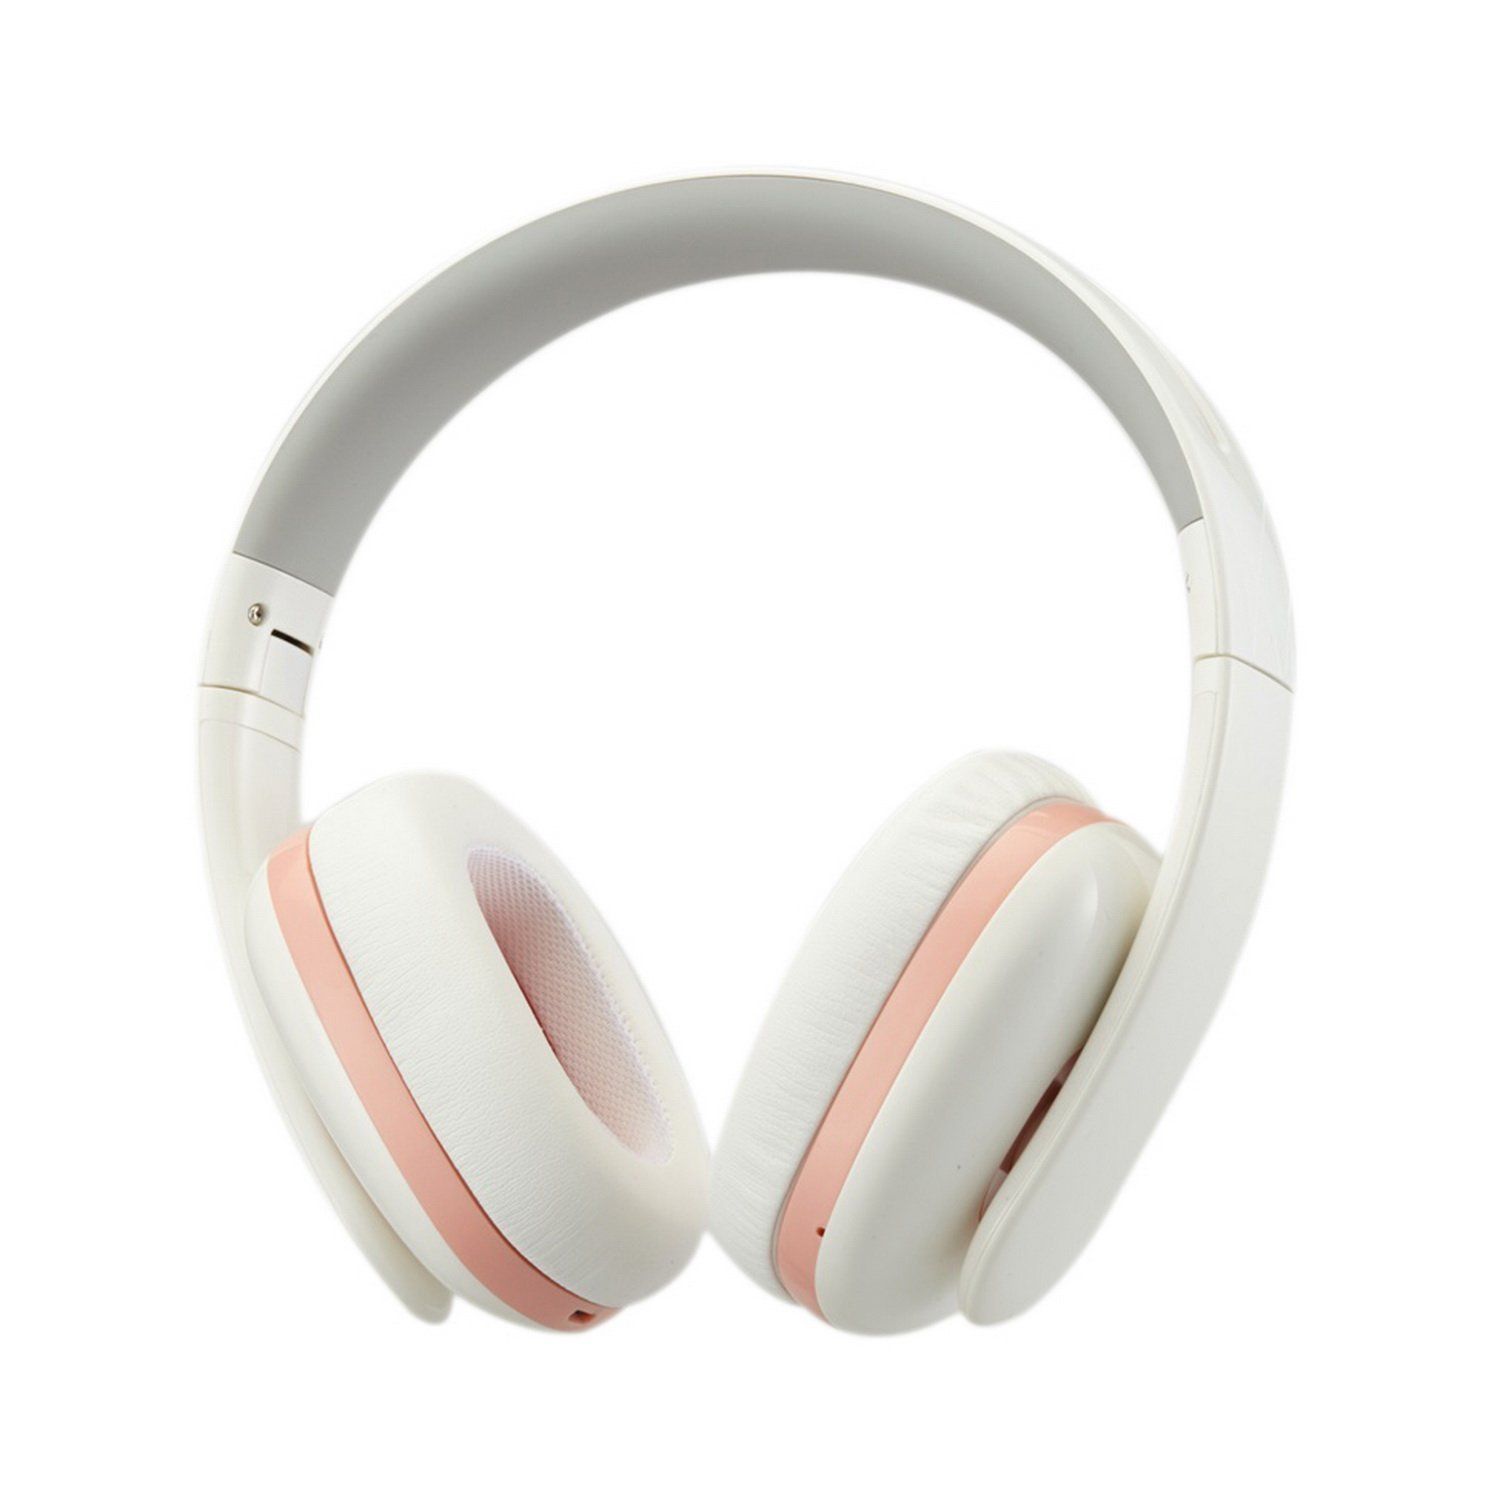 Censi Moecen Wired Cat Ear Headphones with Detachable Cat Ears (White/Pink)